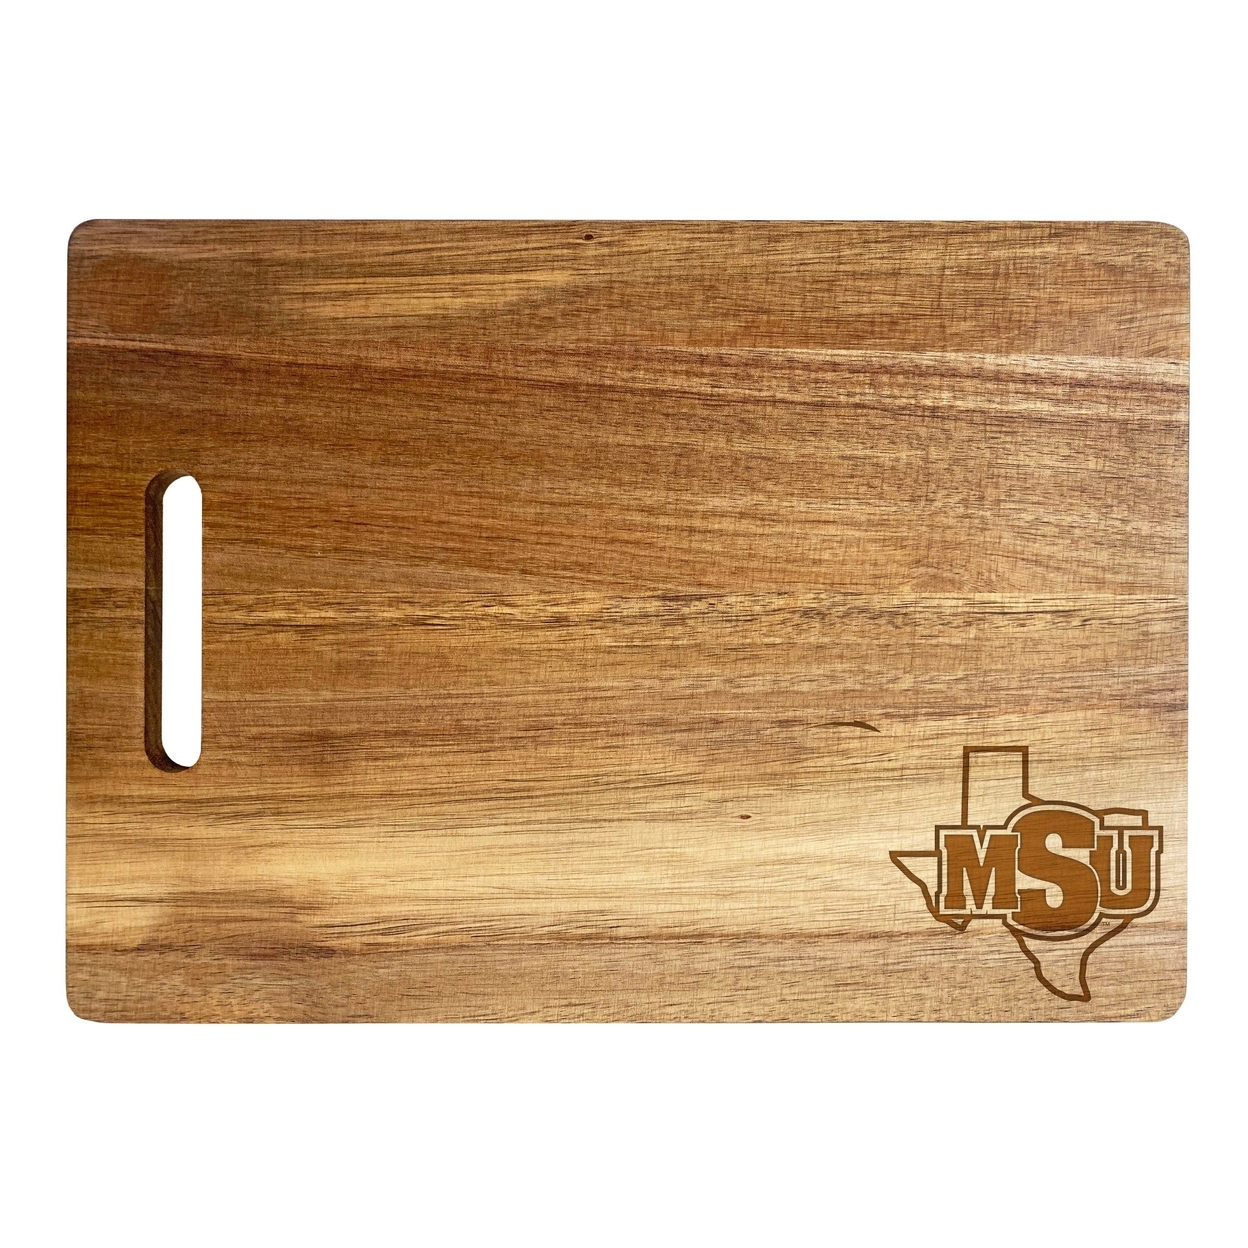 Midwestern State University Engraved Wooden Cutting Board 10 X 14 Acacia Wood - Small Engraving